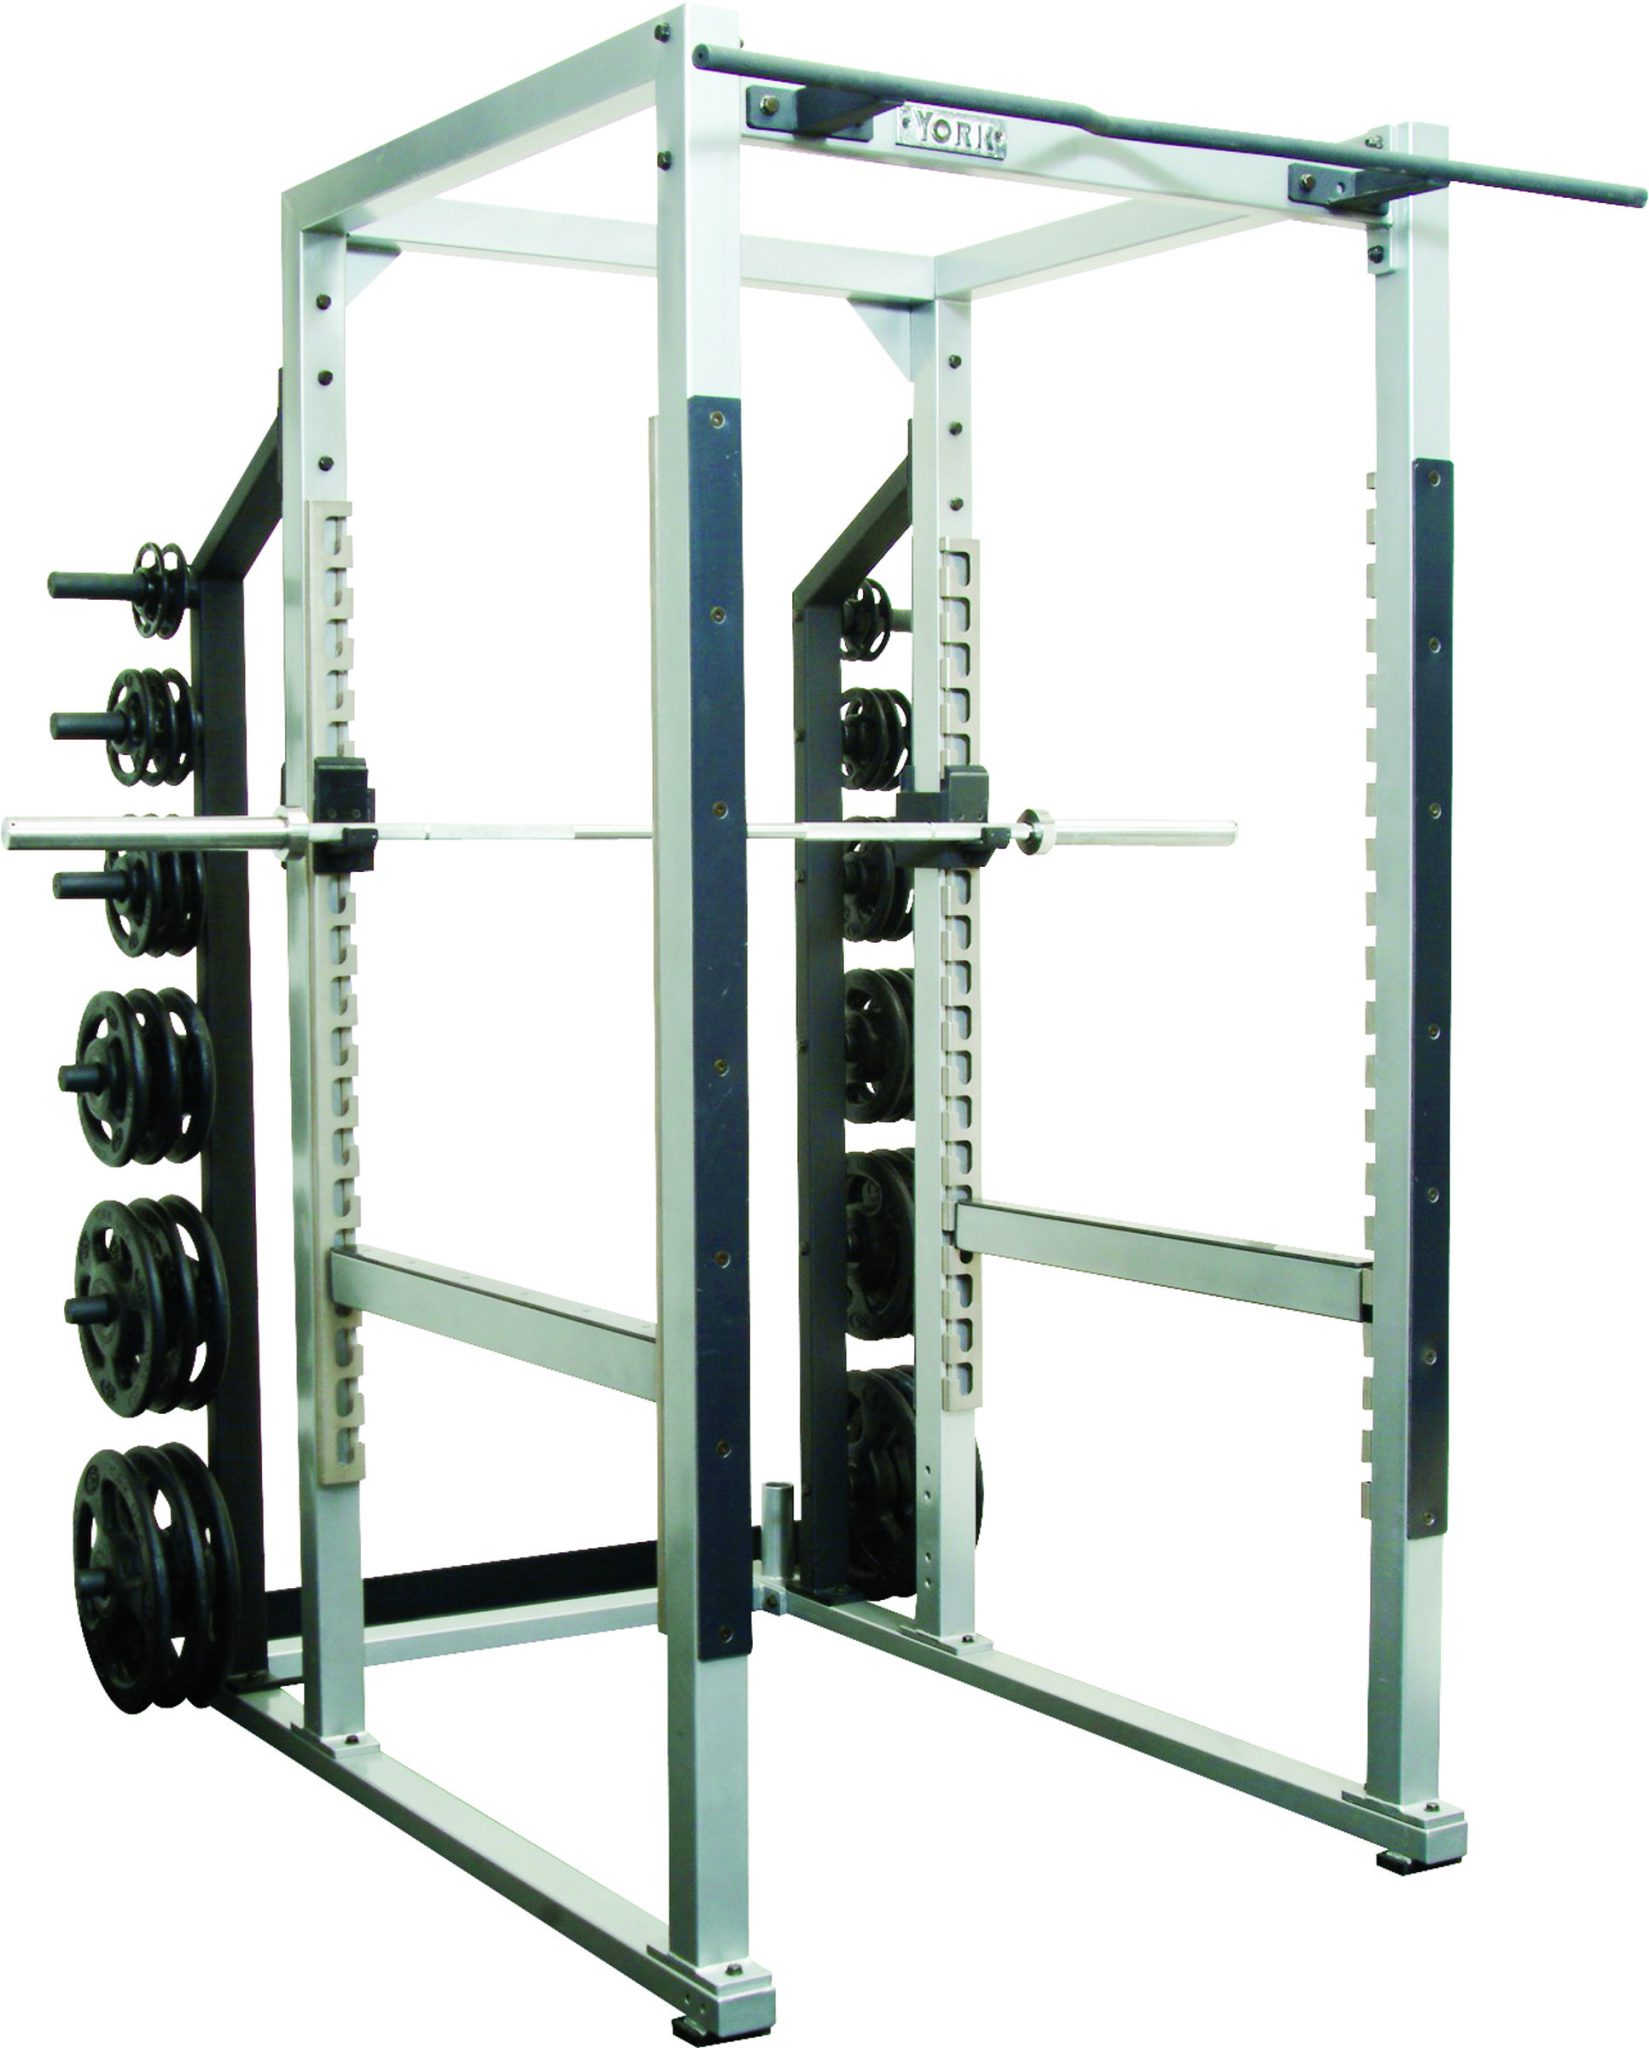 Power Rack Multi-Purpose Cage with room for Dumbbells and POSITION Weight PLATES